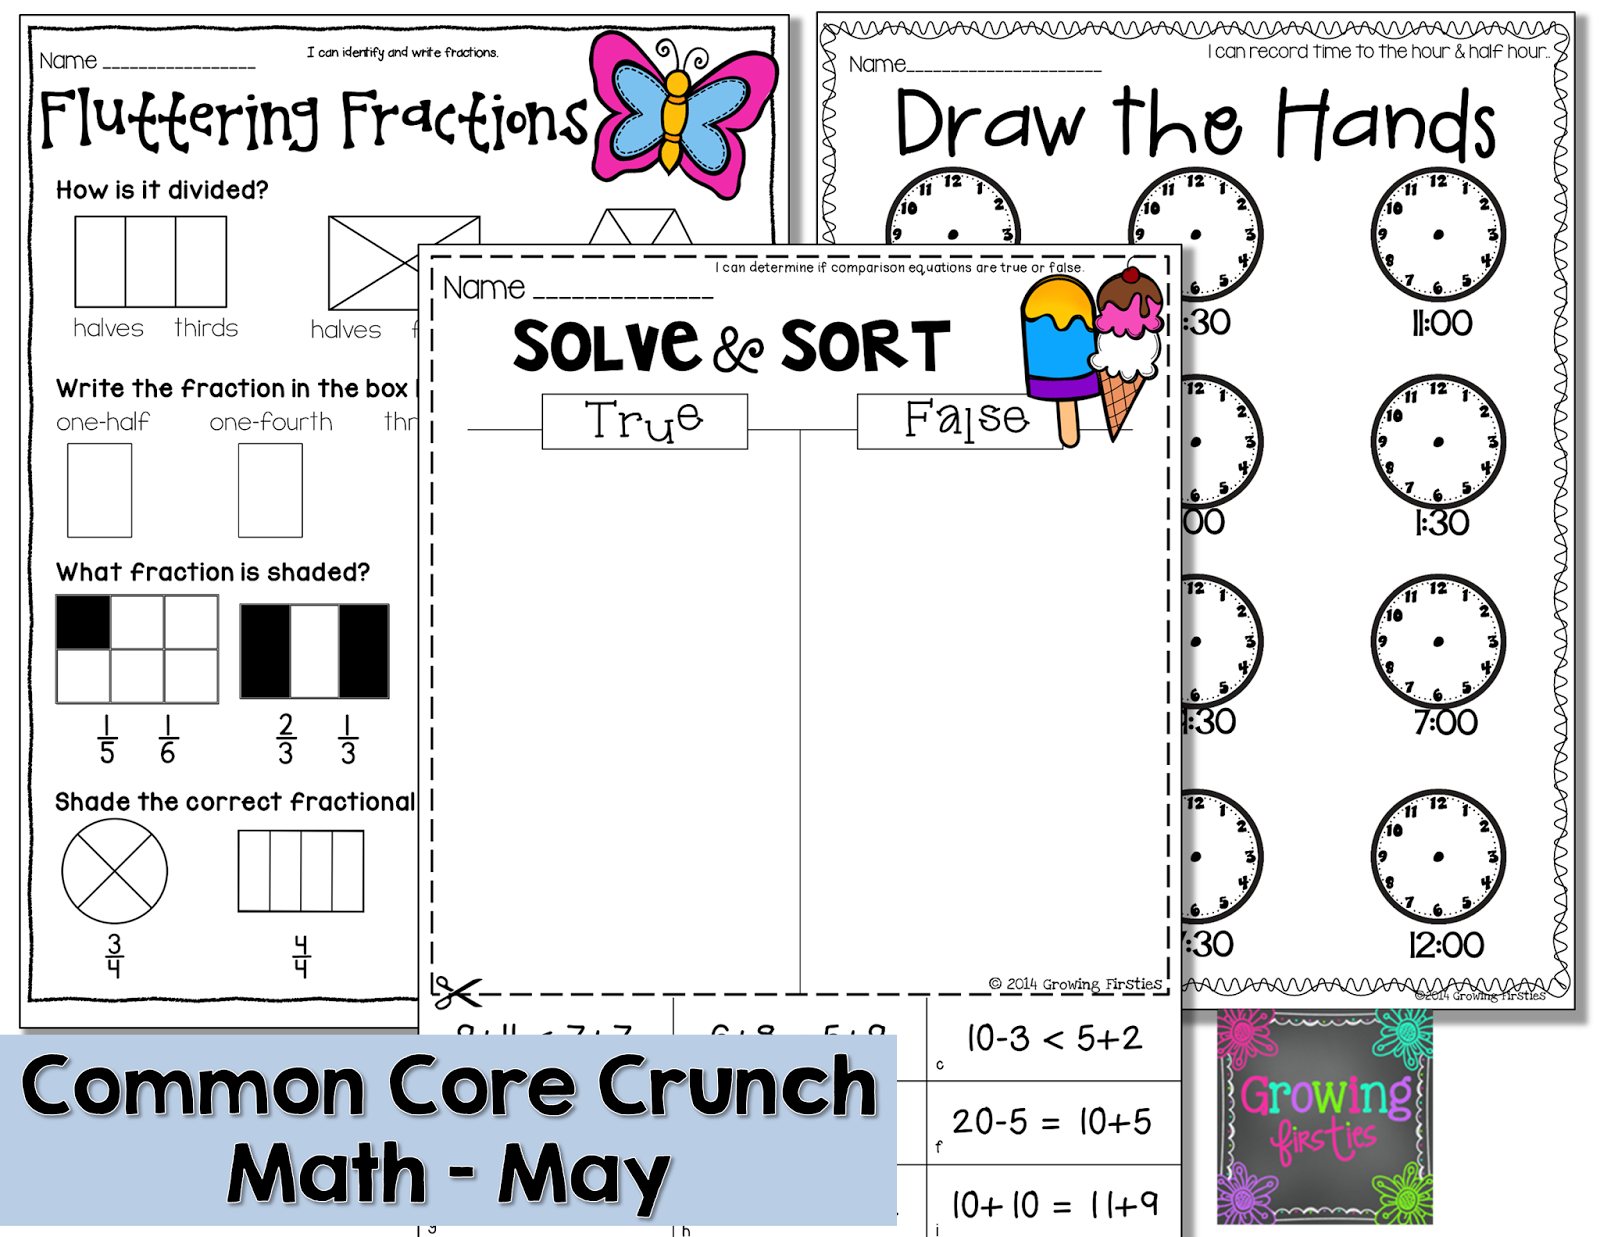 Growing Firsties - Common Core Crunch - May Math